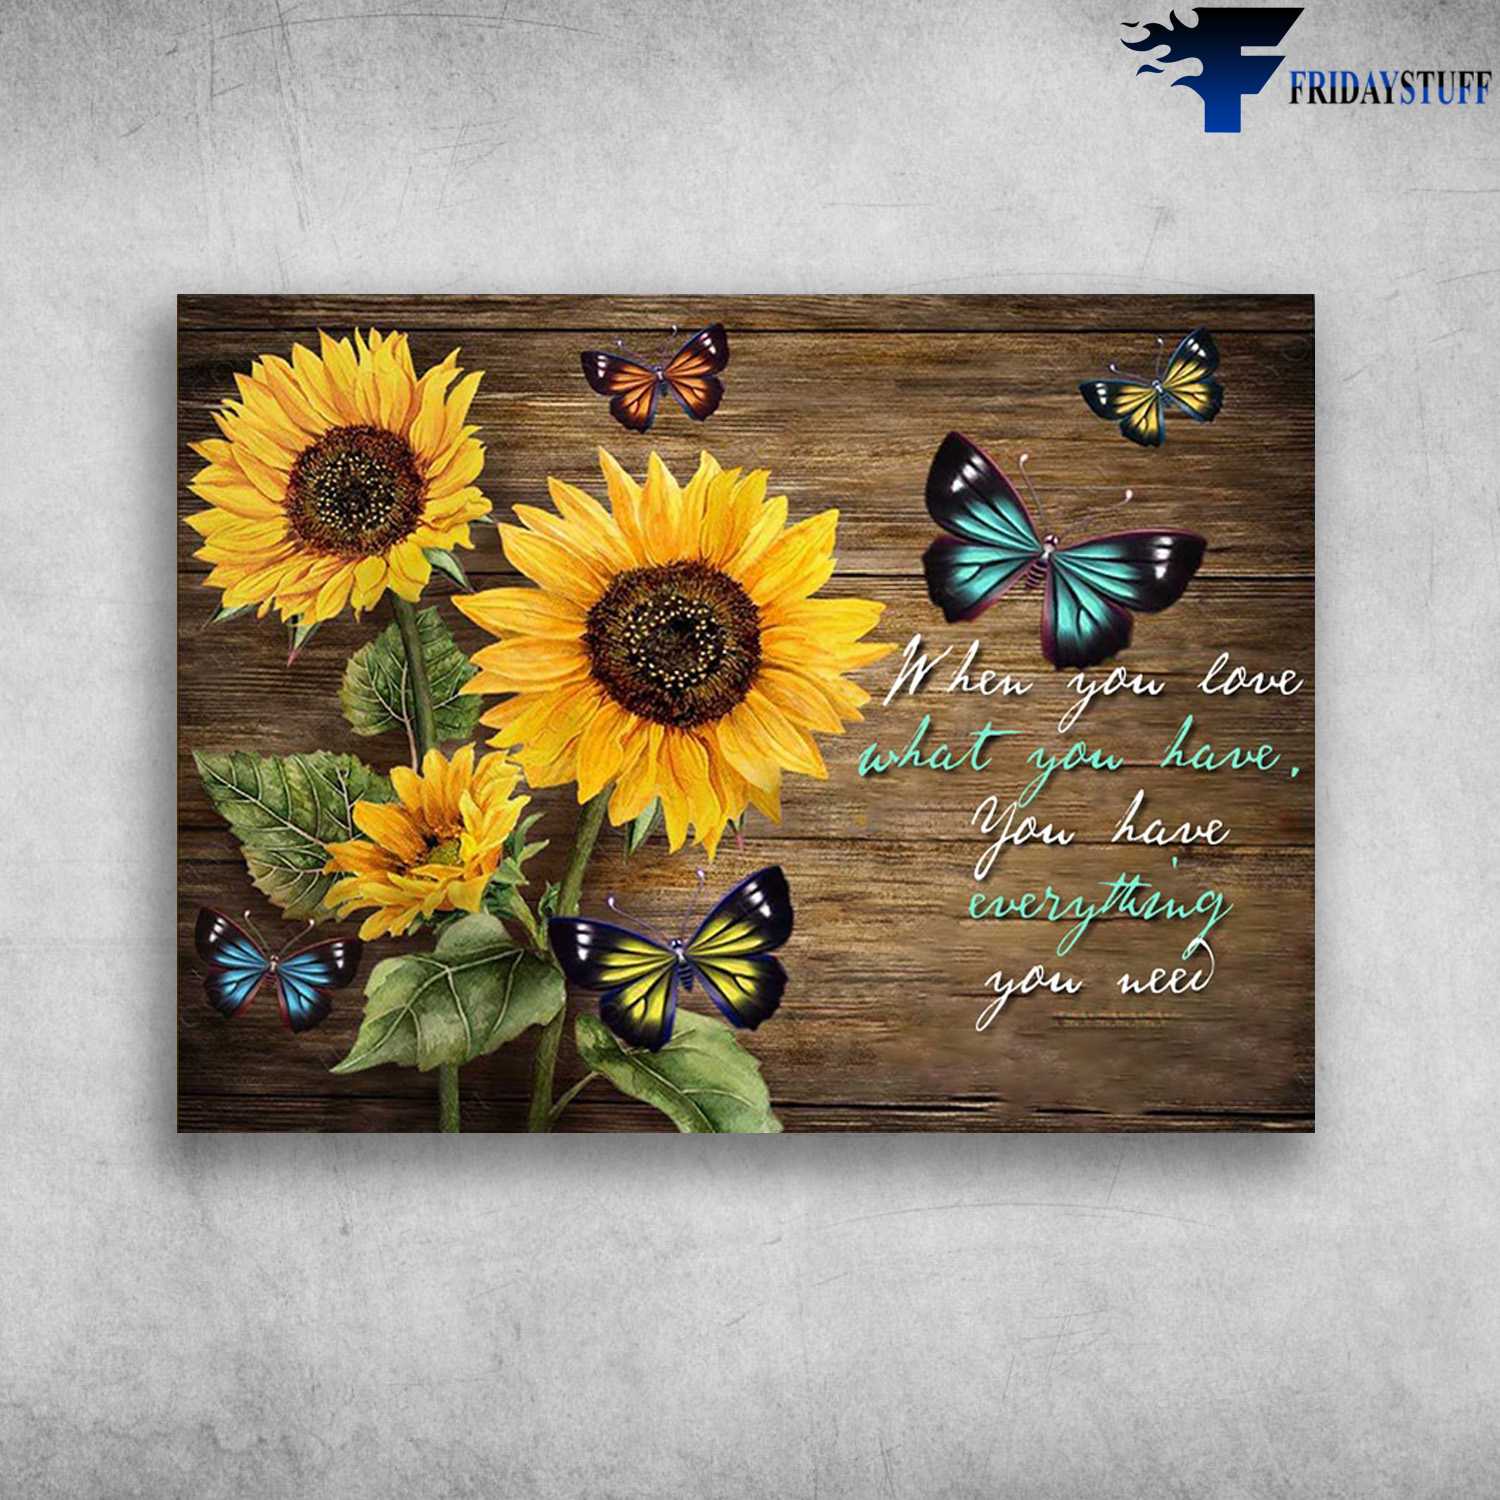 Sunflower Butterfly - When You Love What You Have, You Have Everything You Need